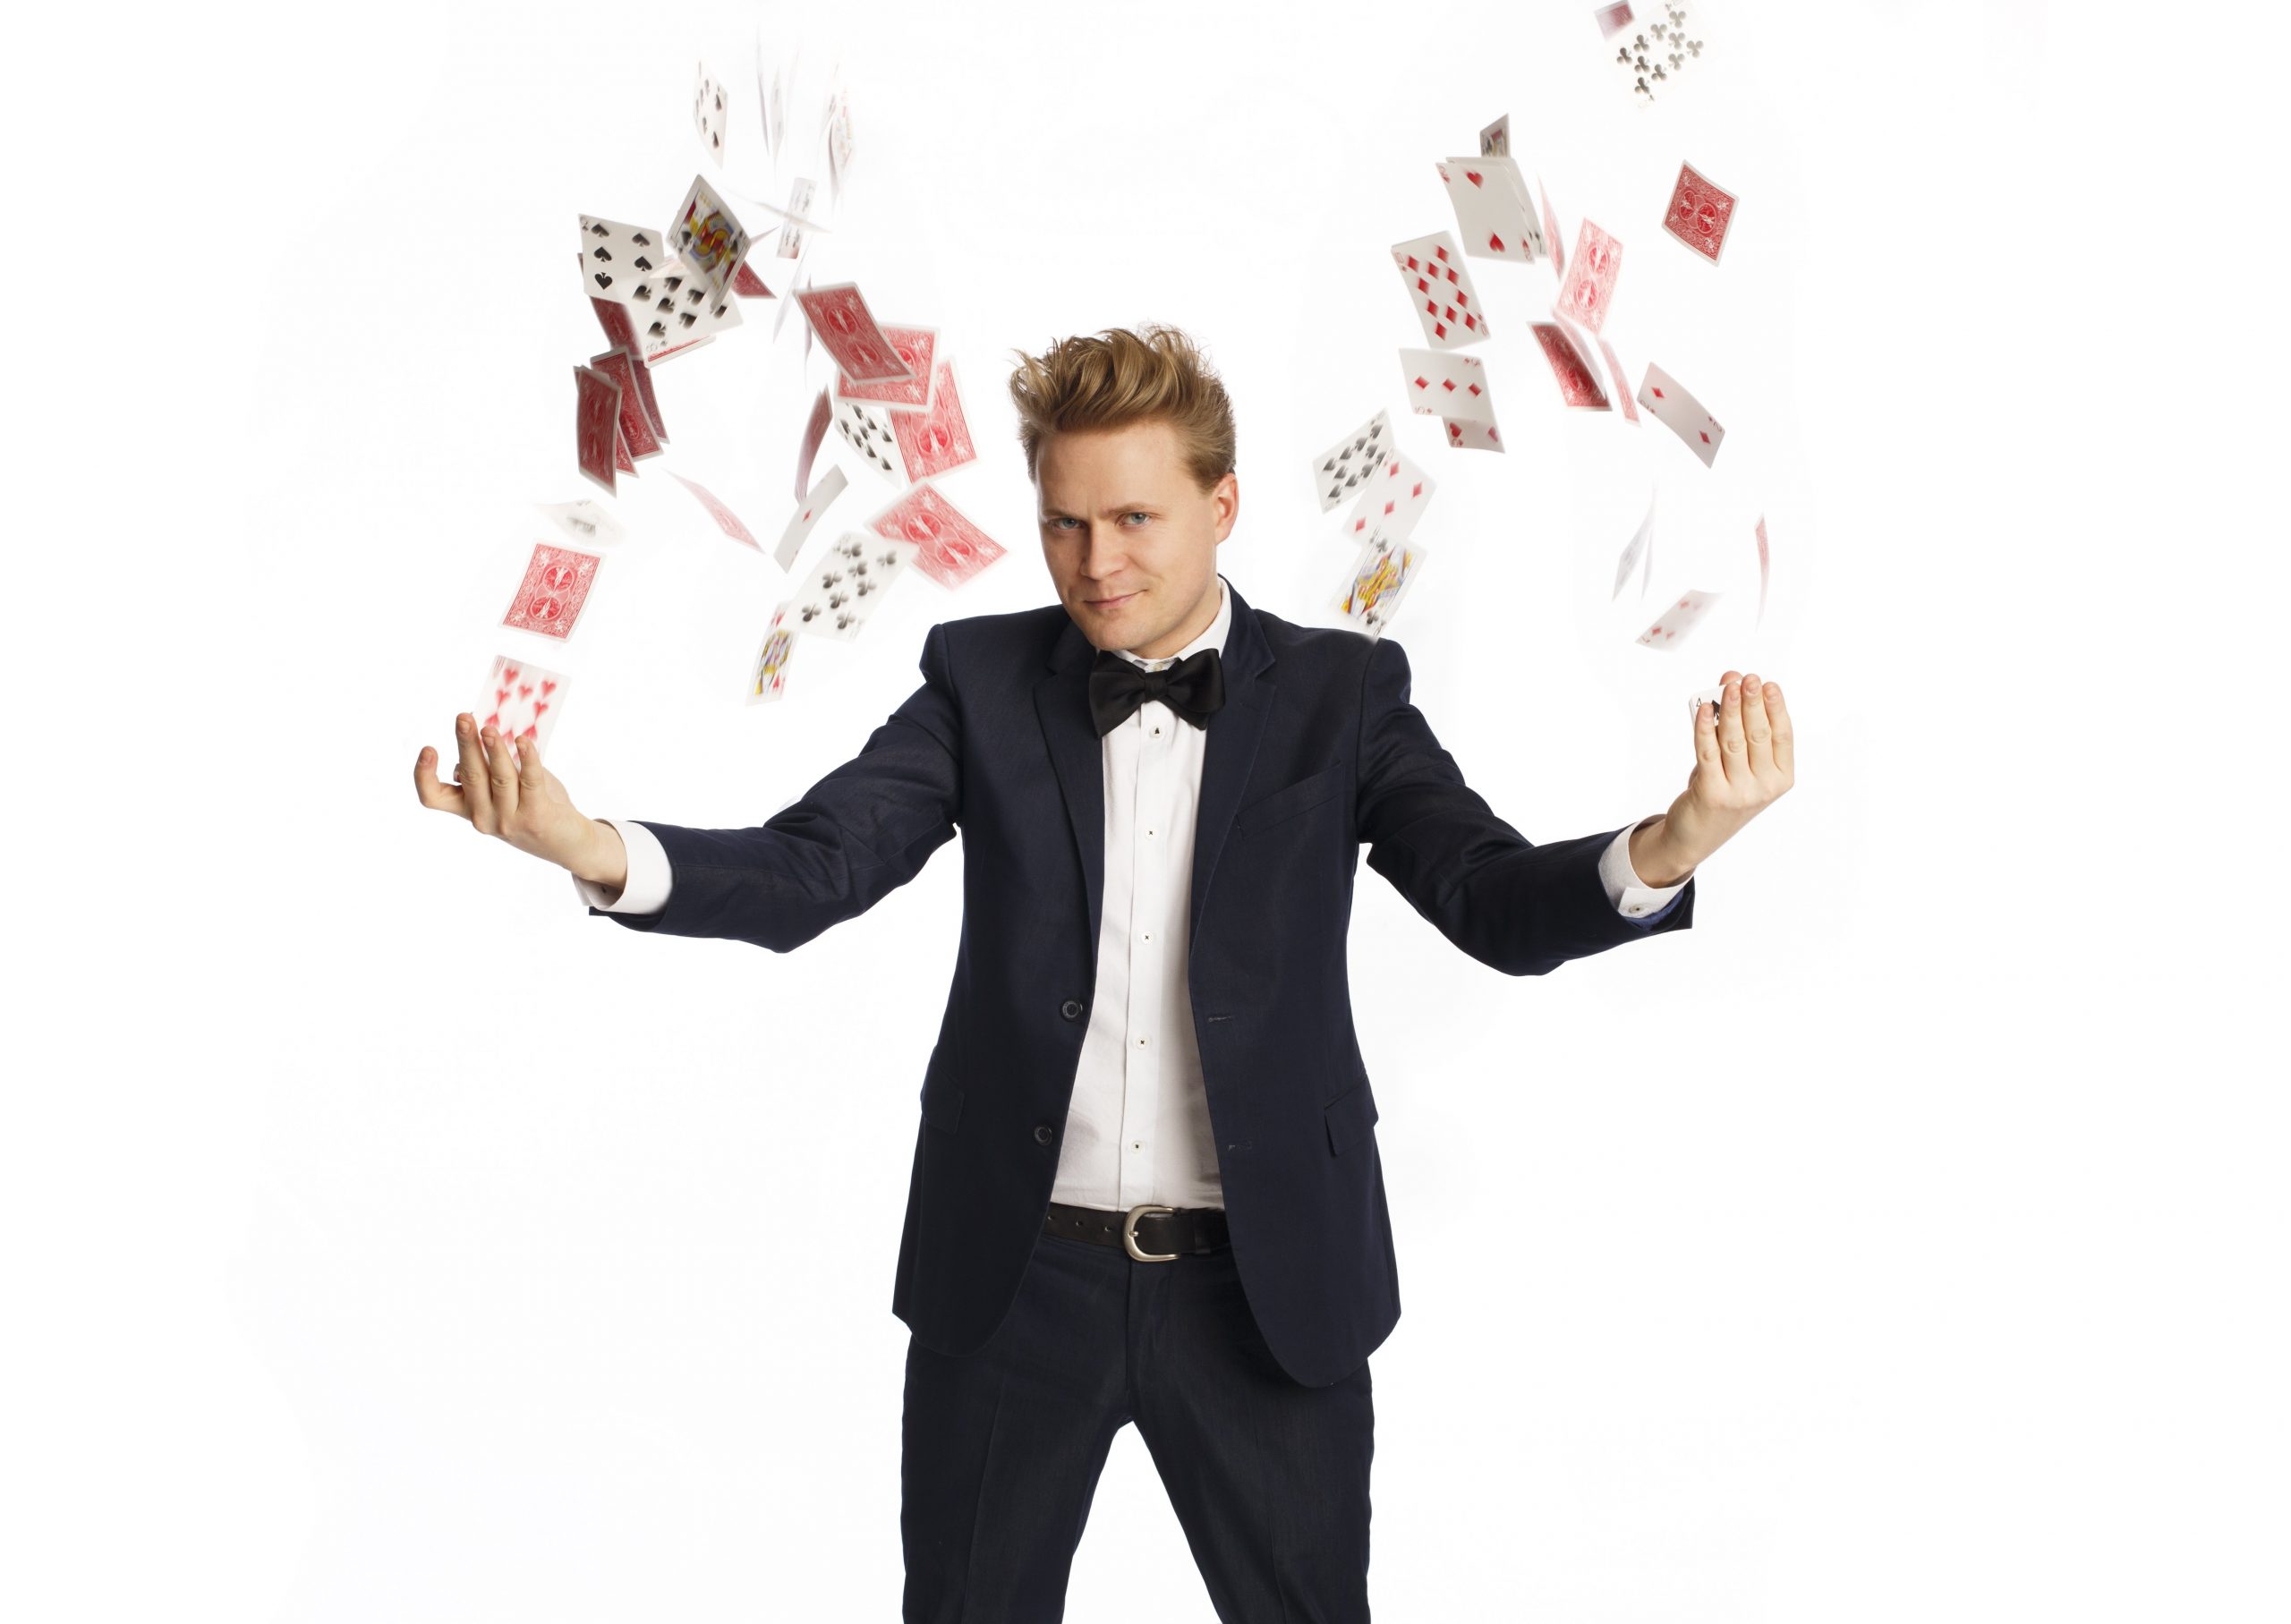 Man has both arms out stretched while a deck of cards float about his hands